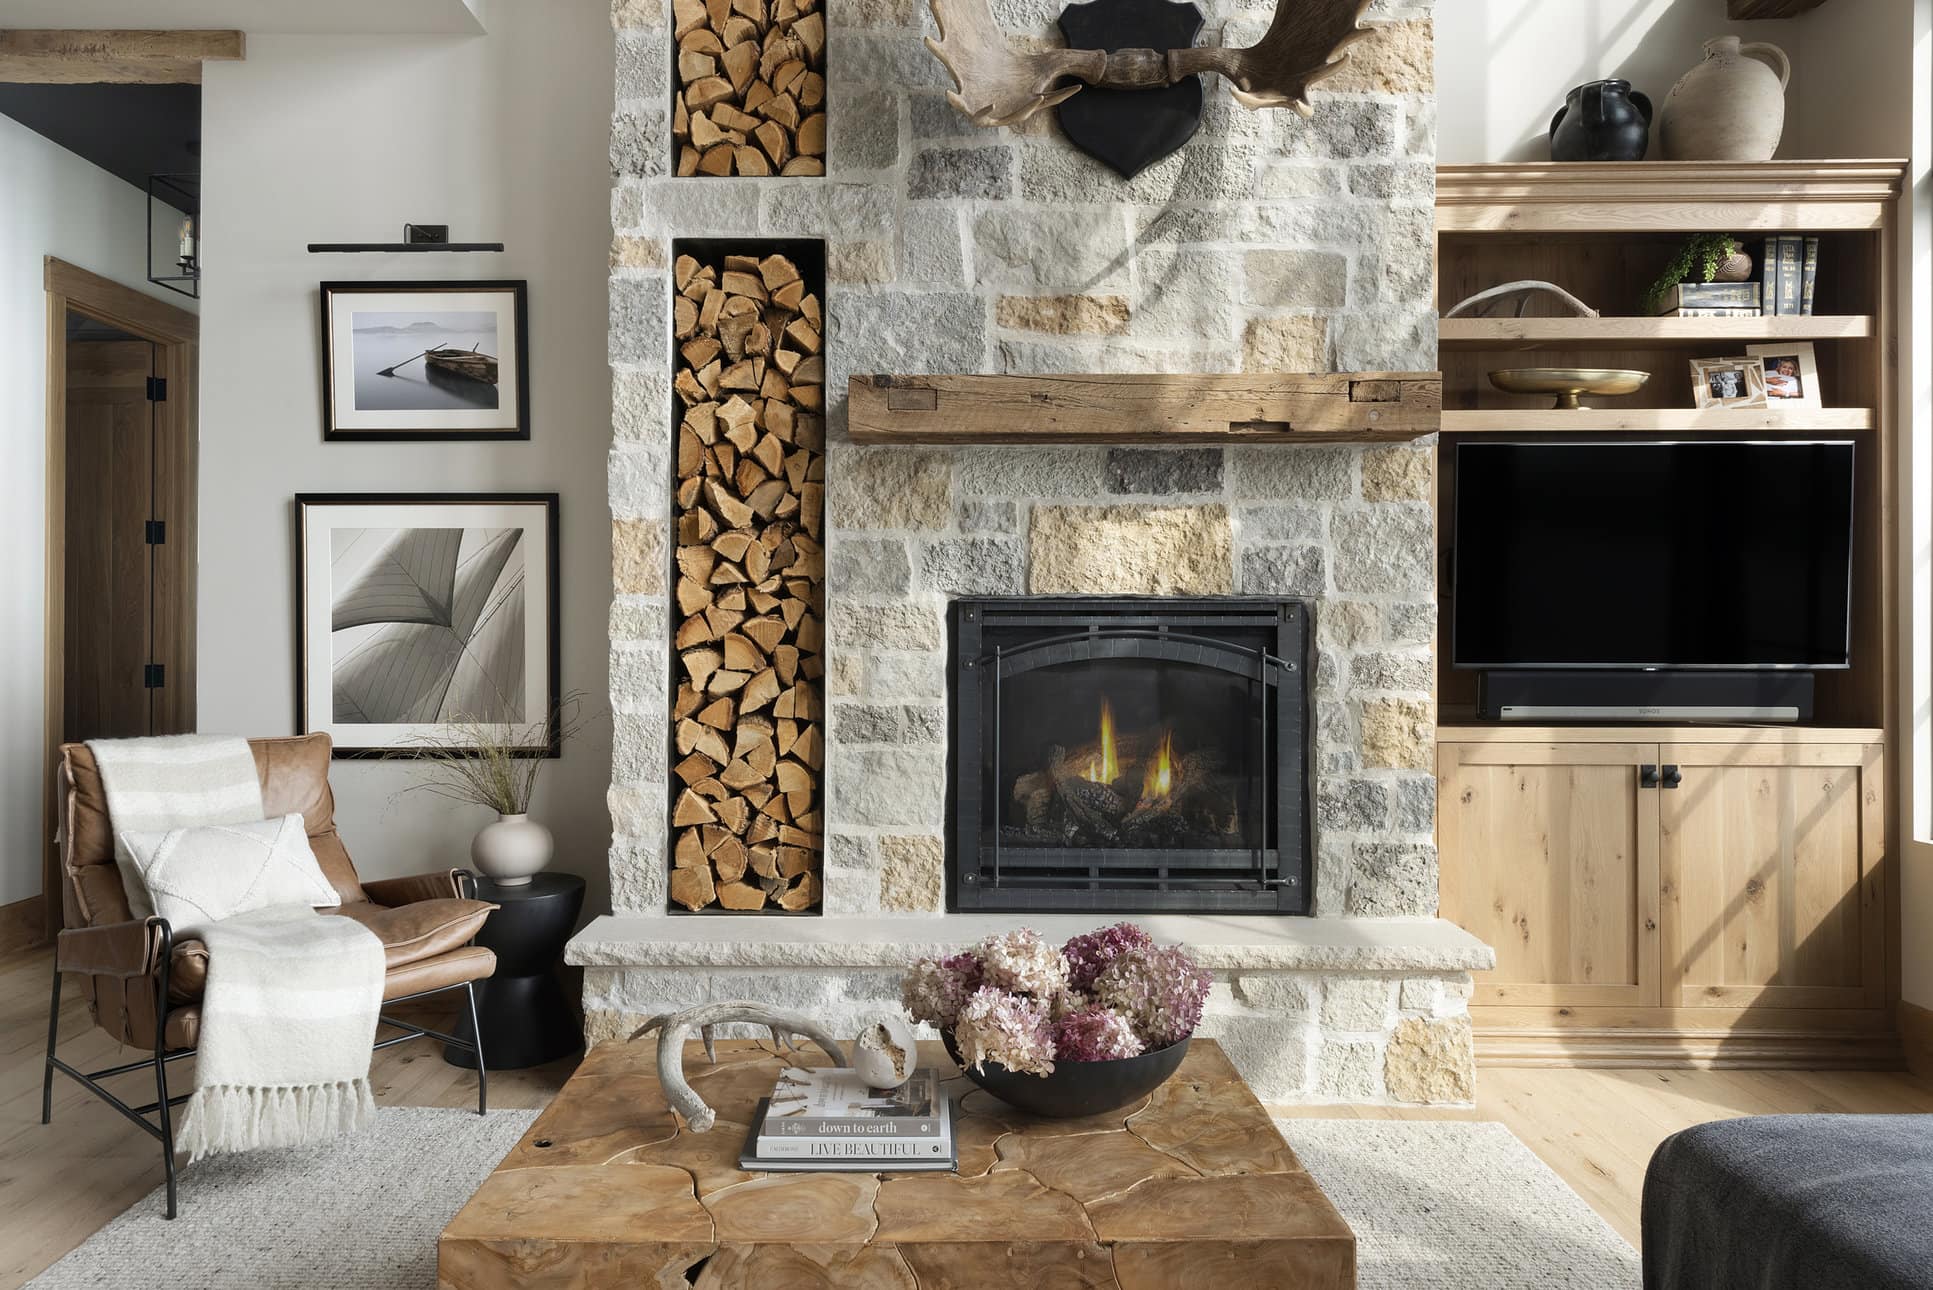 Manomin Resawn Timbers reclaimed fireplace mantel installed by Wes Hanson Builders and Designed by Tays & Co. Design